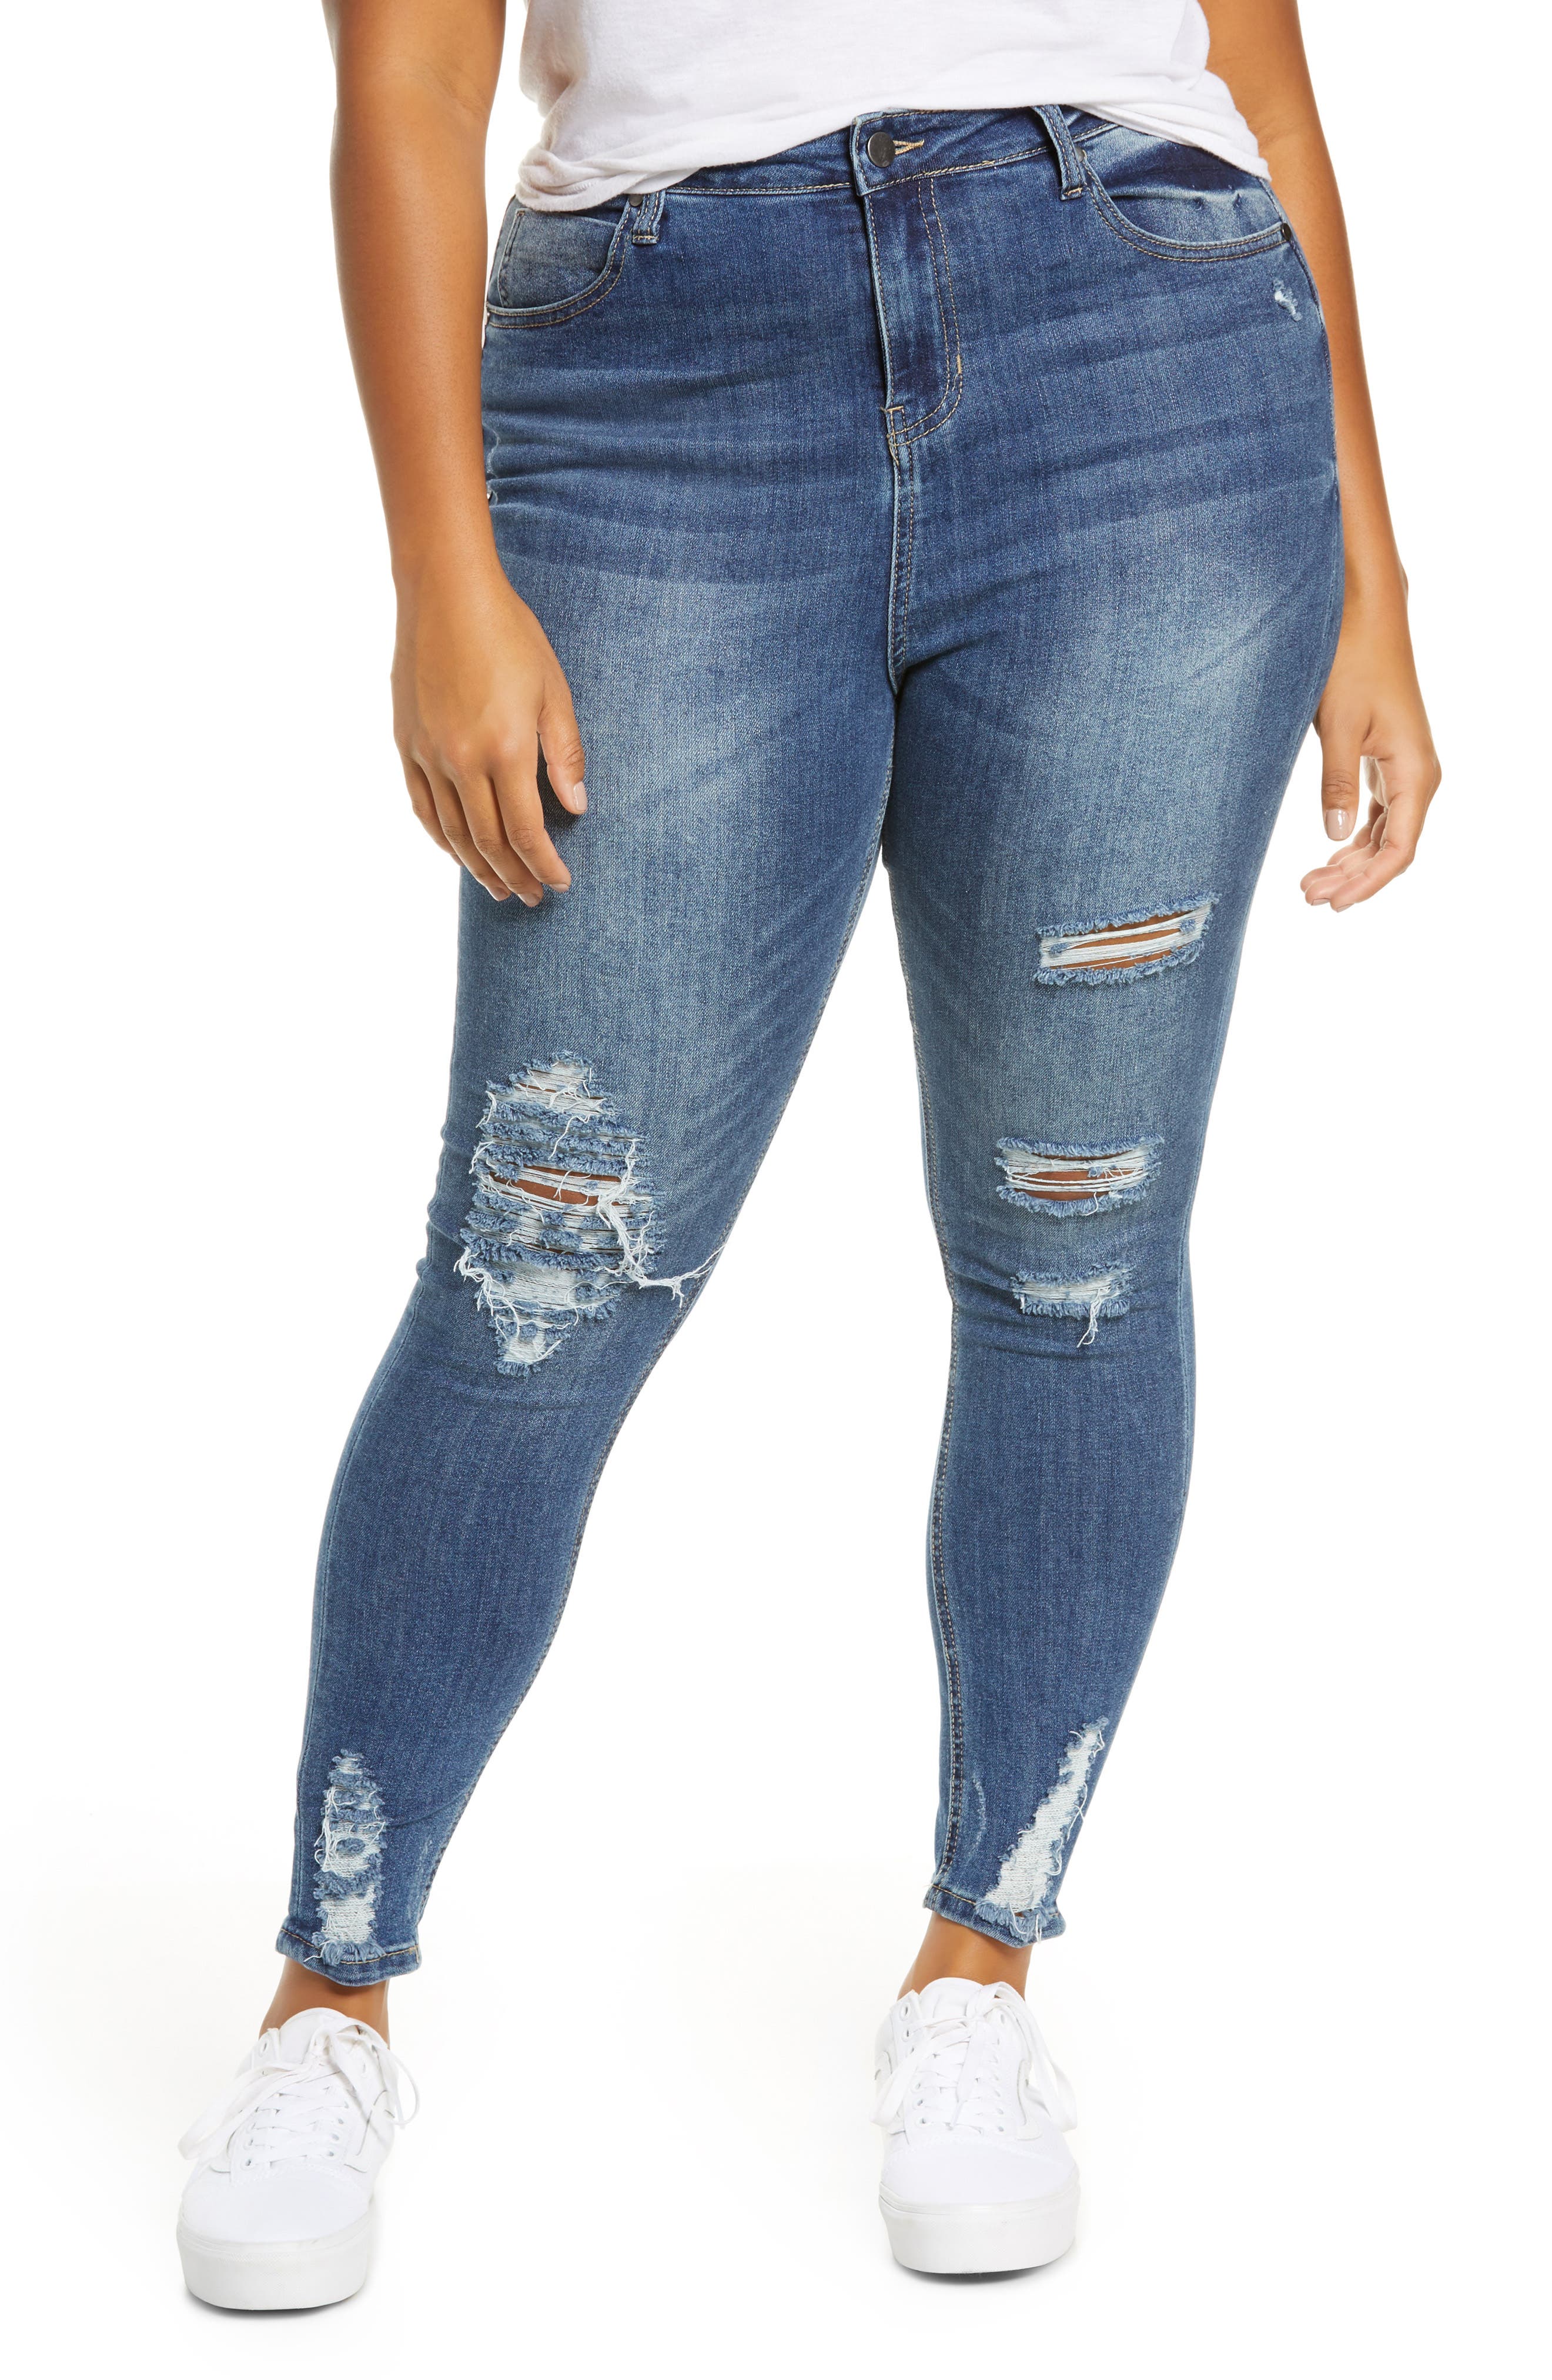 plus size jeans with chains